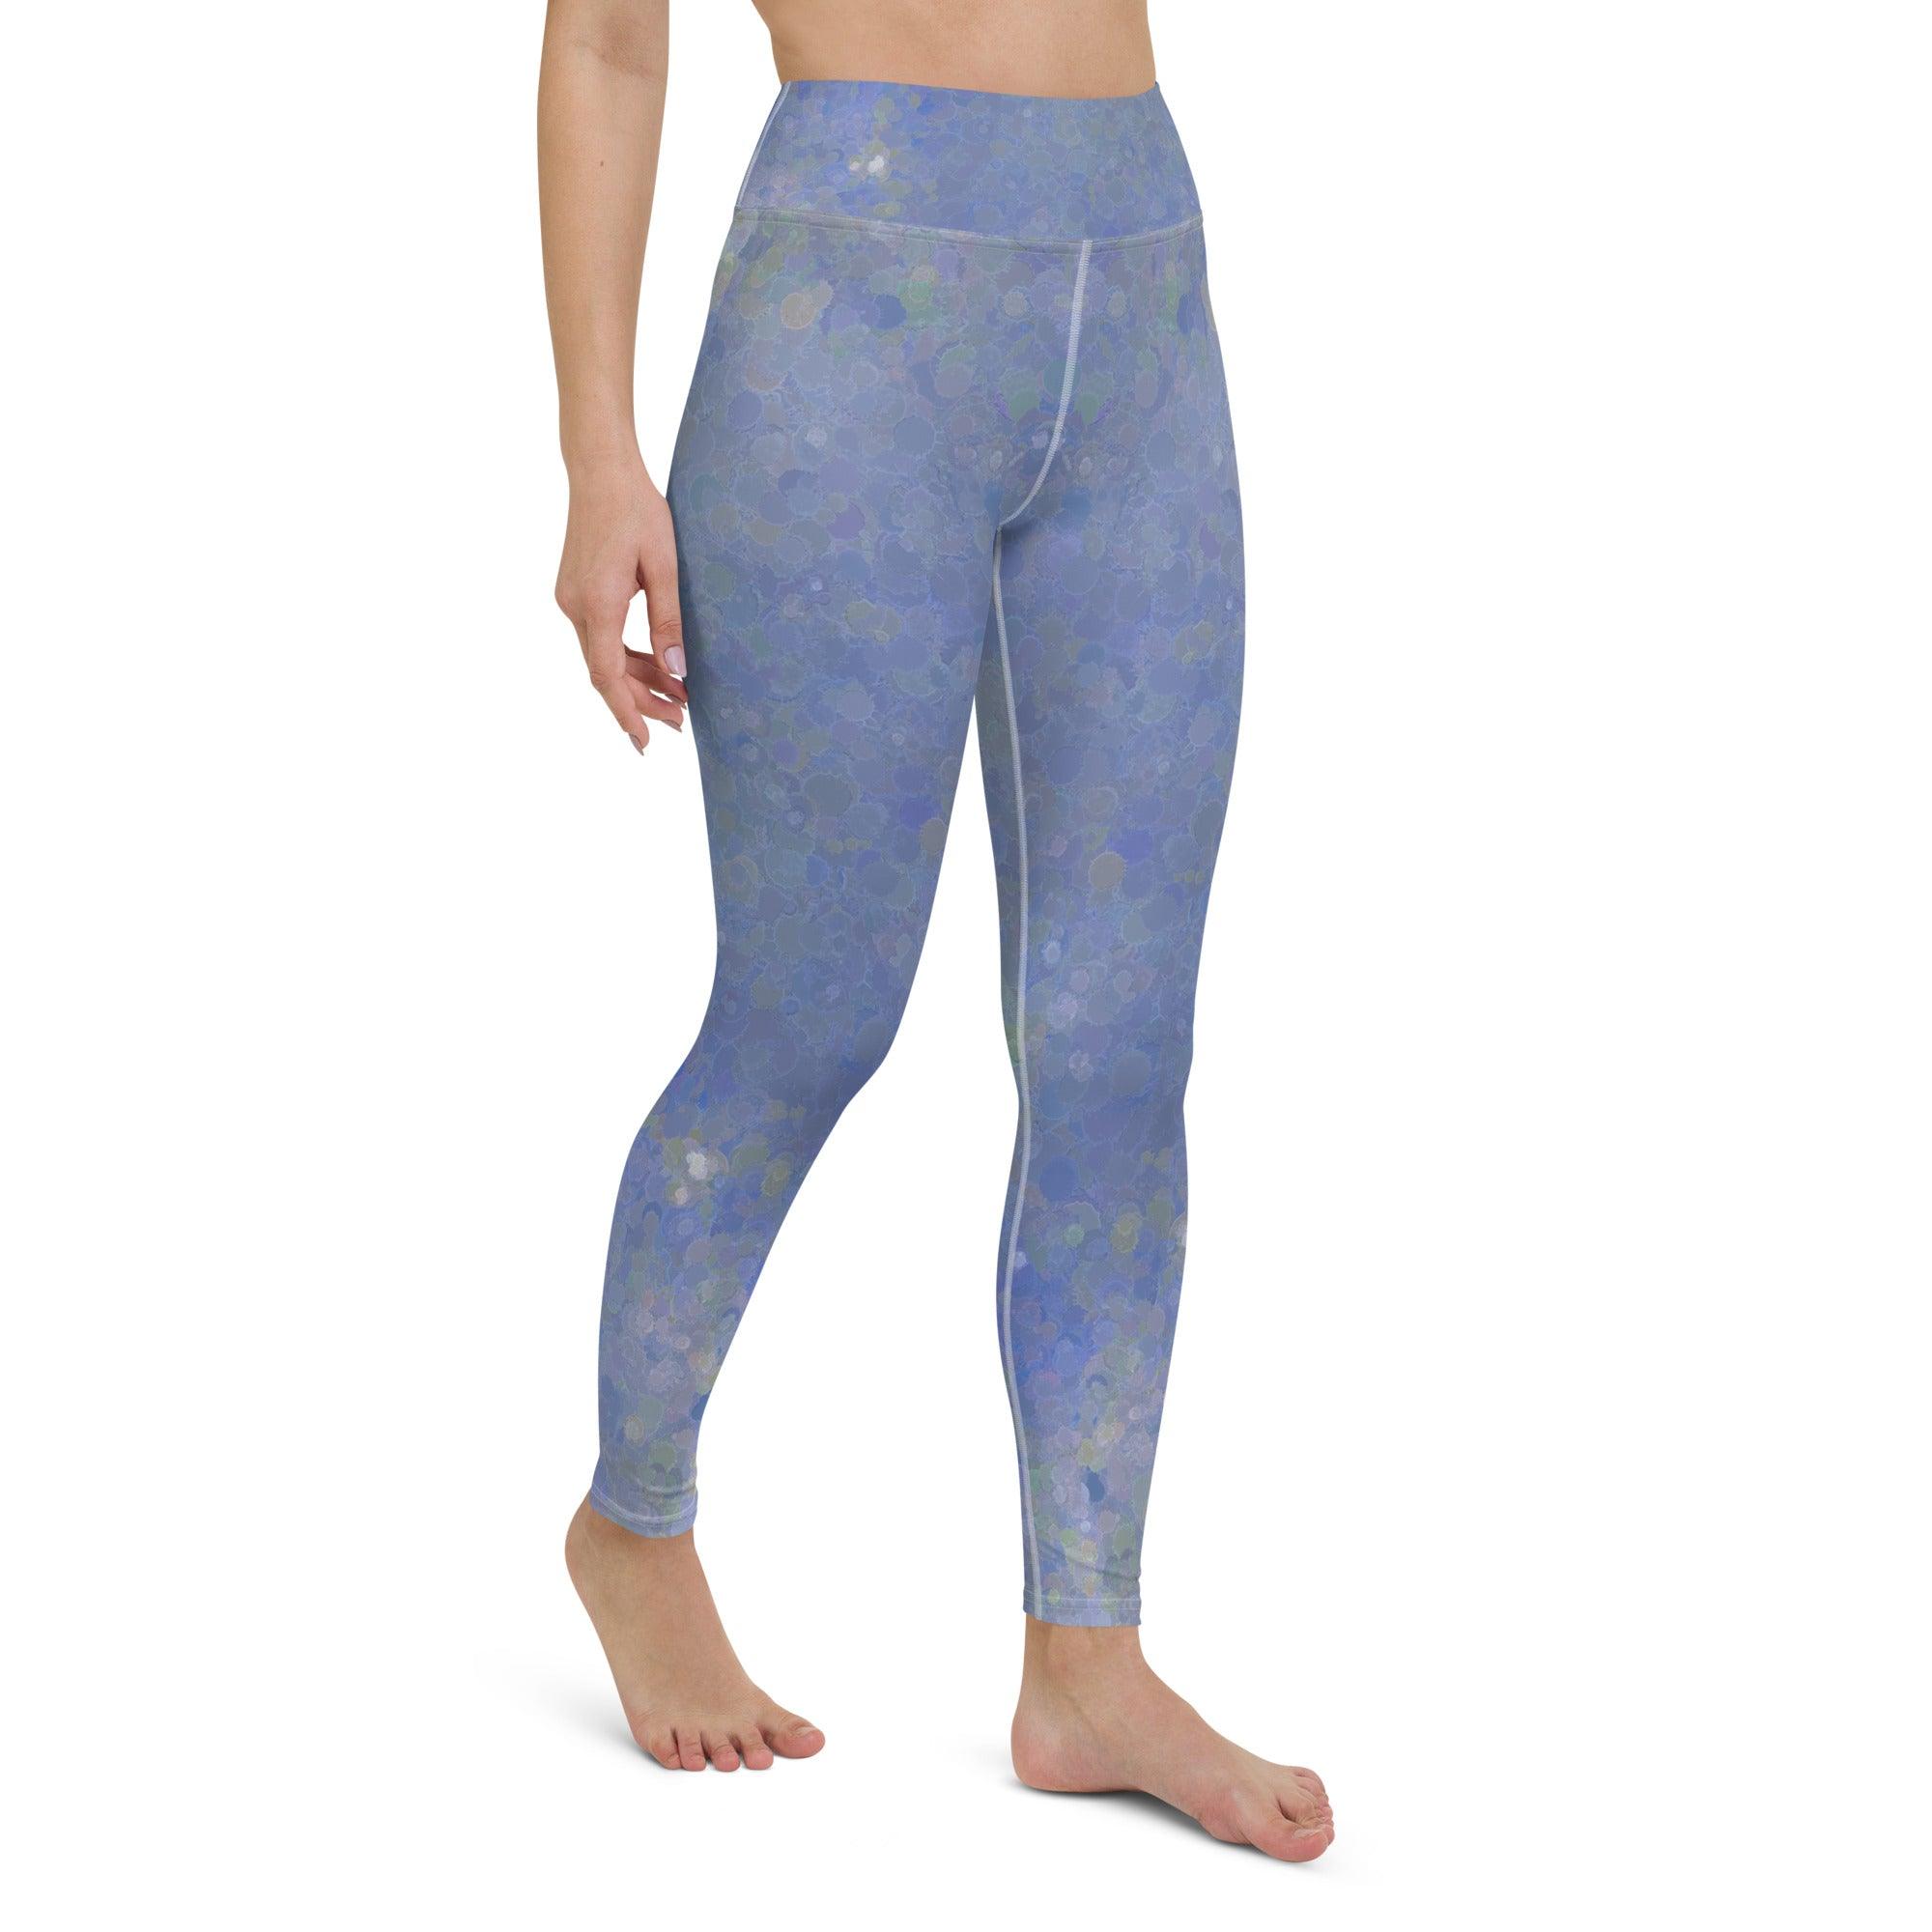 Fashionable Glitter 1 leggings for fitness enthusiasts.